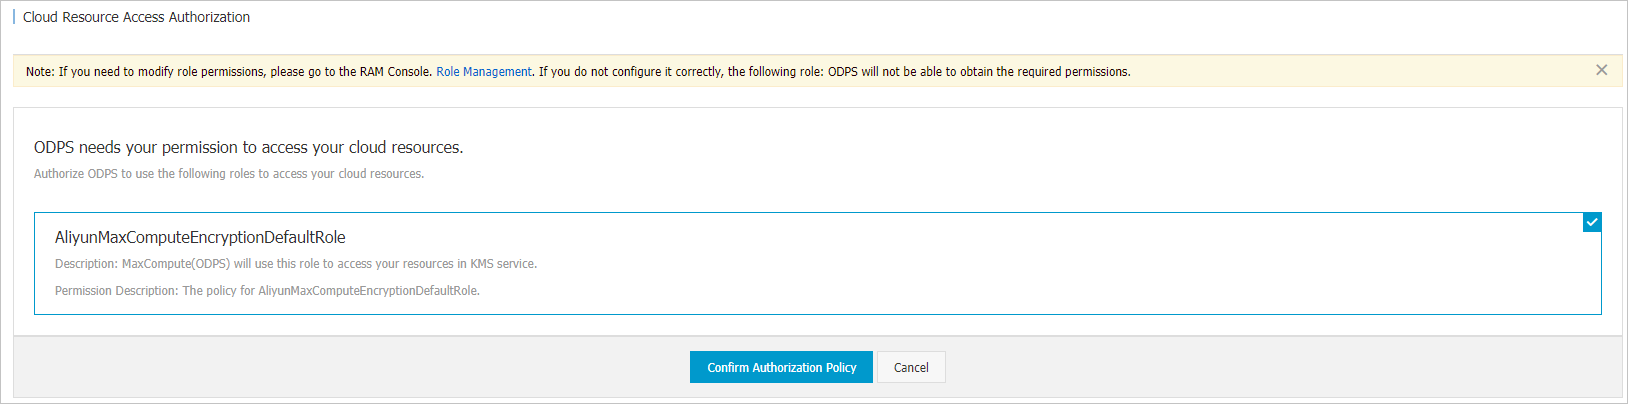 Confirm Authorization Policy